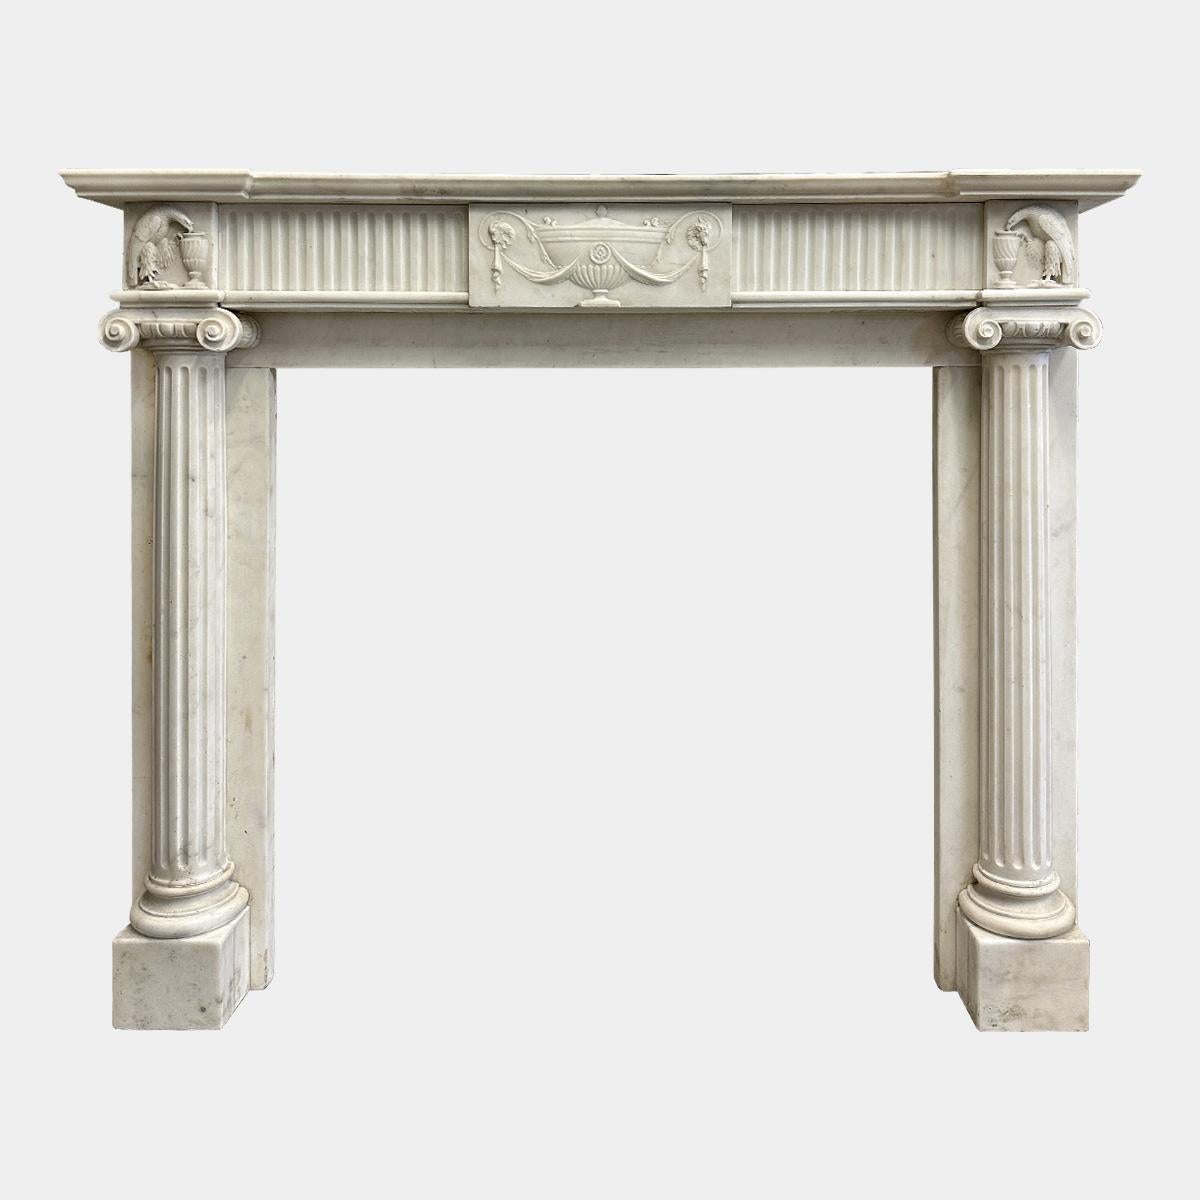 A very good quality English Regency period fireplace executed in Italian Statuary white marble. The jambs with fluted columns stood on square foot blocks with carved Ionic capitals, with scrolled facia and acanthus leaf within. 
The corner blocks